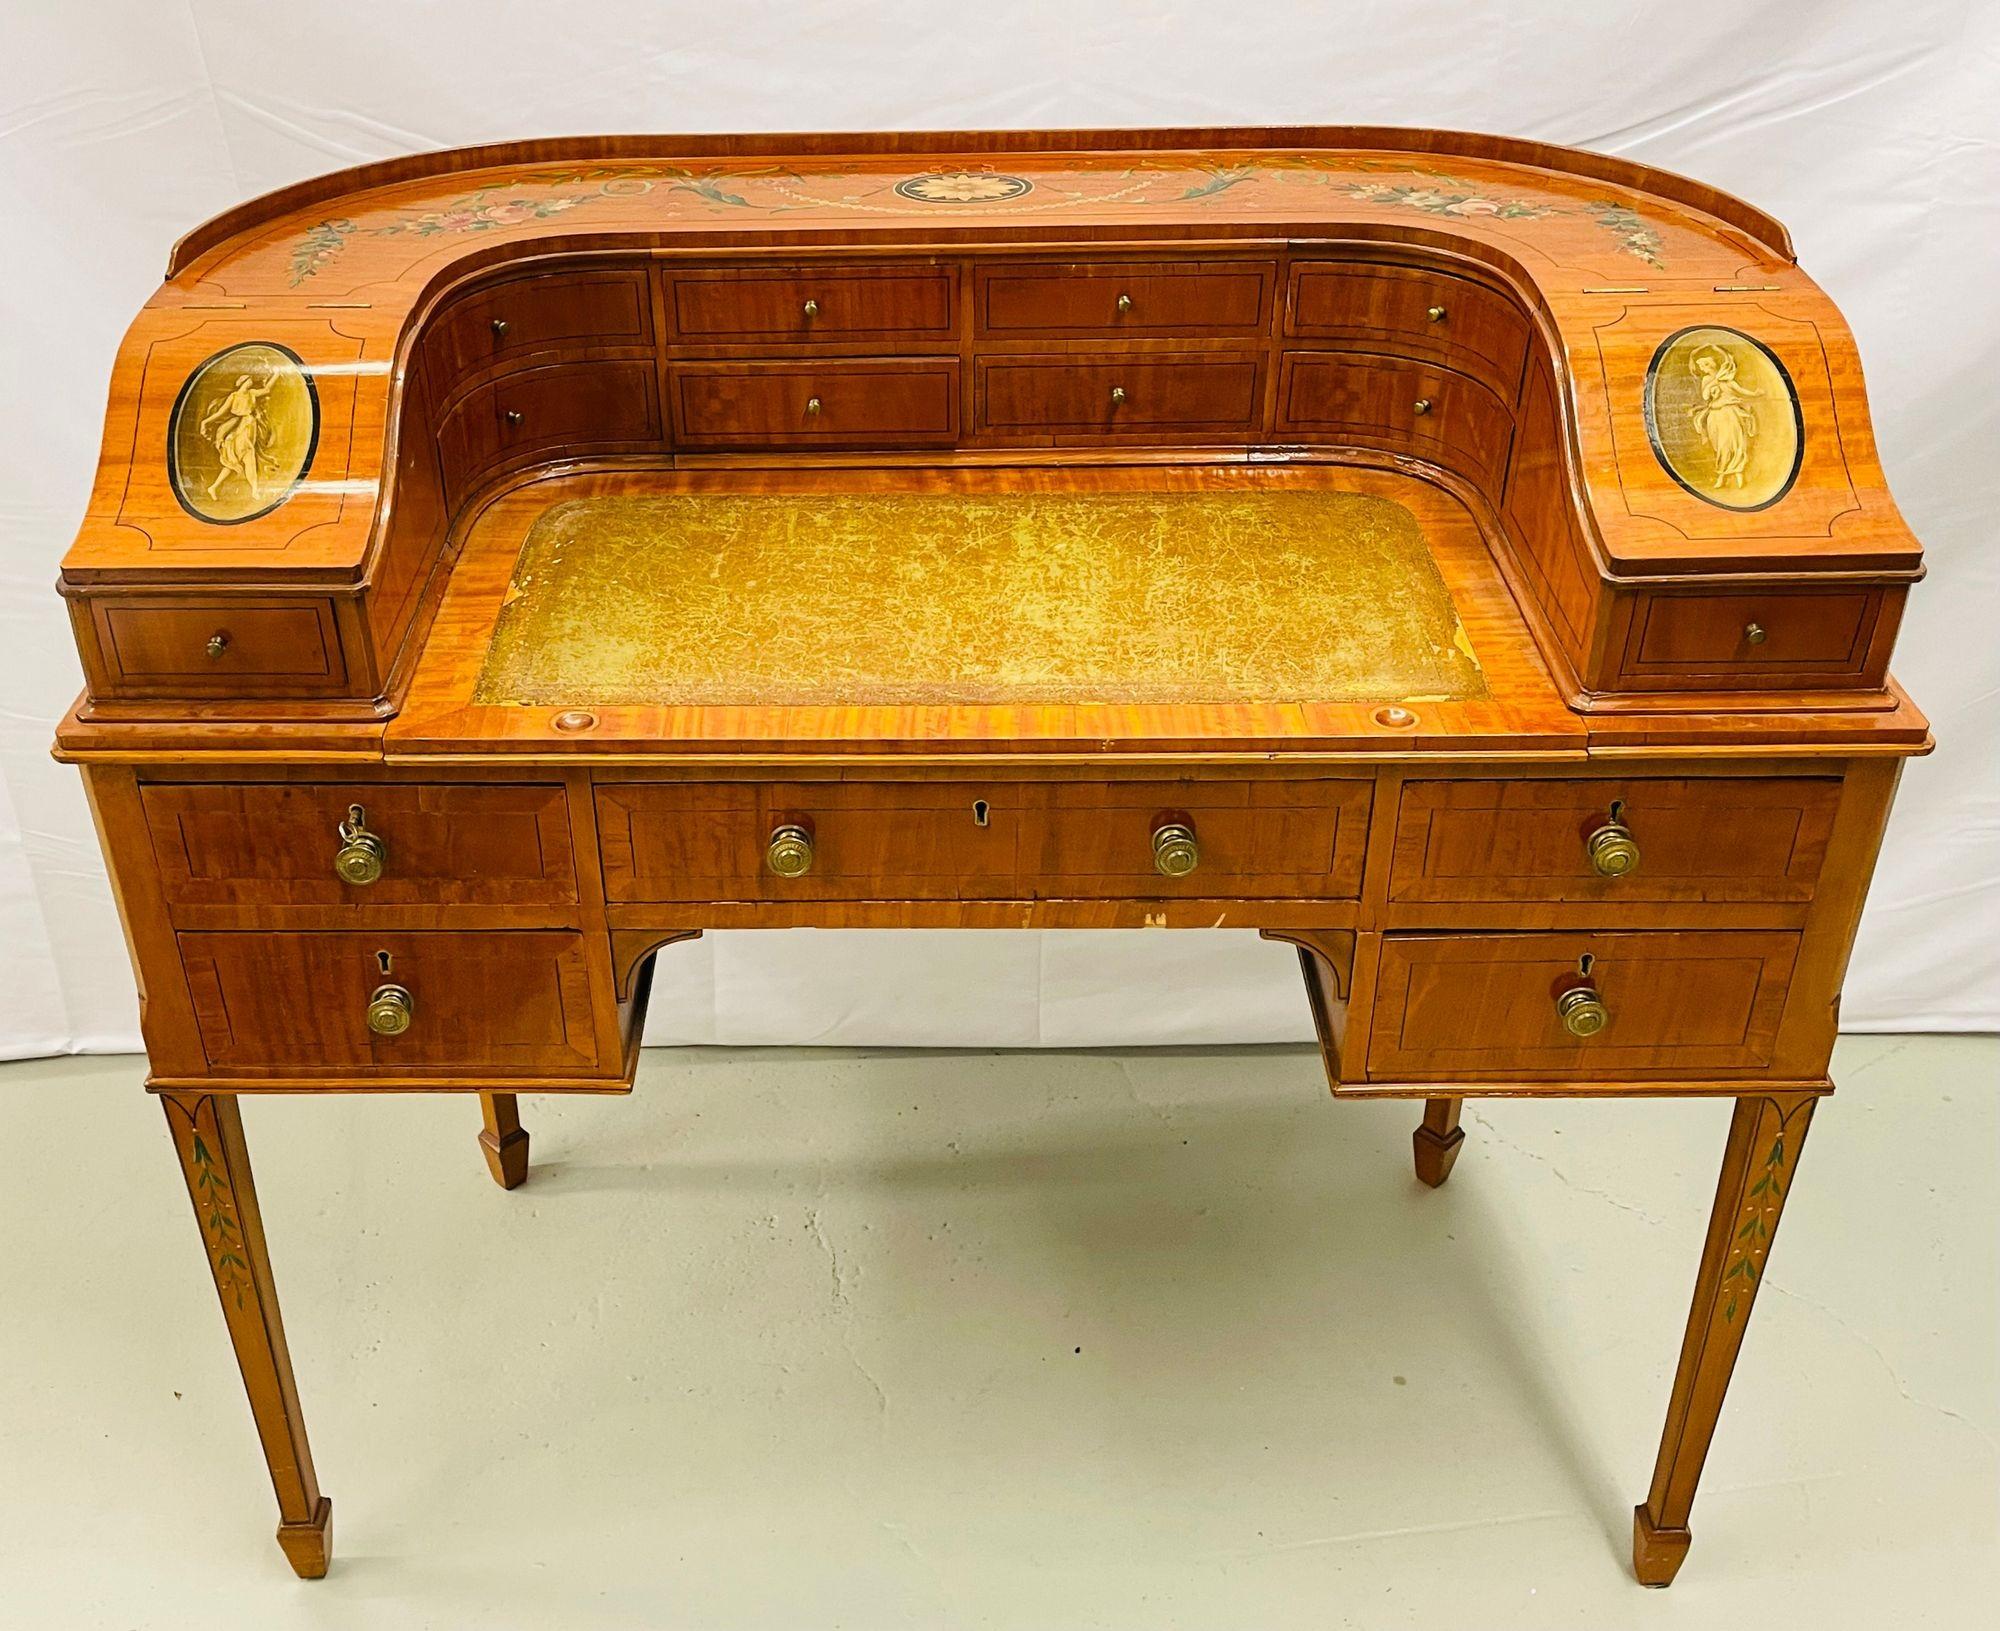 Adams Edwardian Inlaid Carlton house desk, hand painted, satinwood,

An absolutely stunning Adams Carlton House desk in the manner of Angelica Kauffman. Typical form, the superstructure fitted with four banks of two small drawers flanked by curved